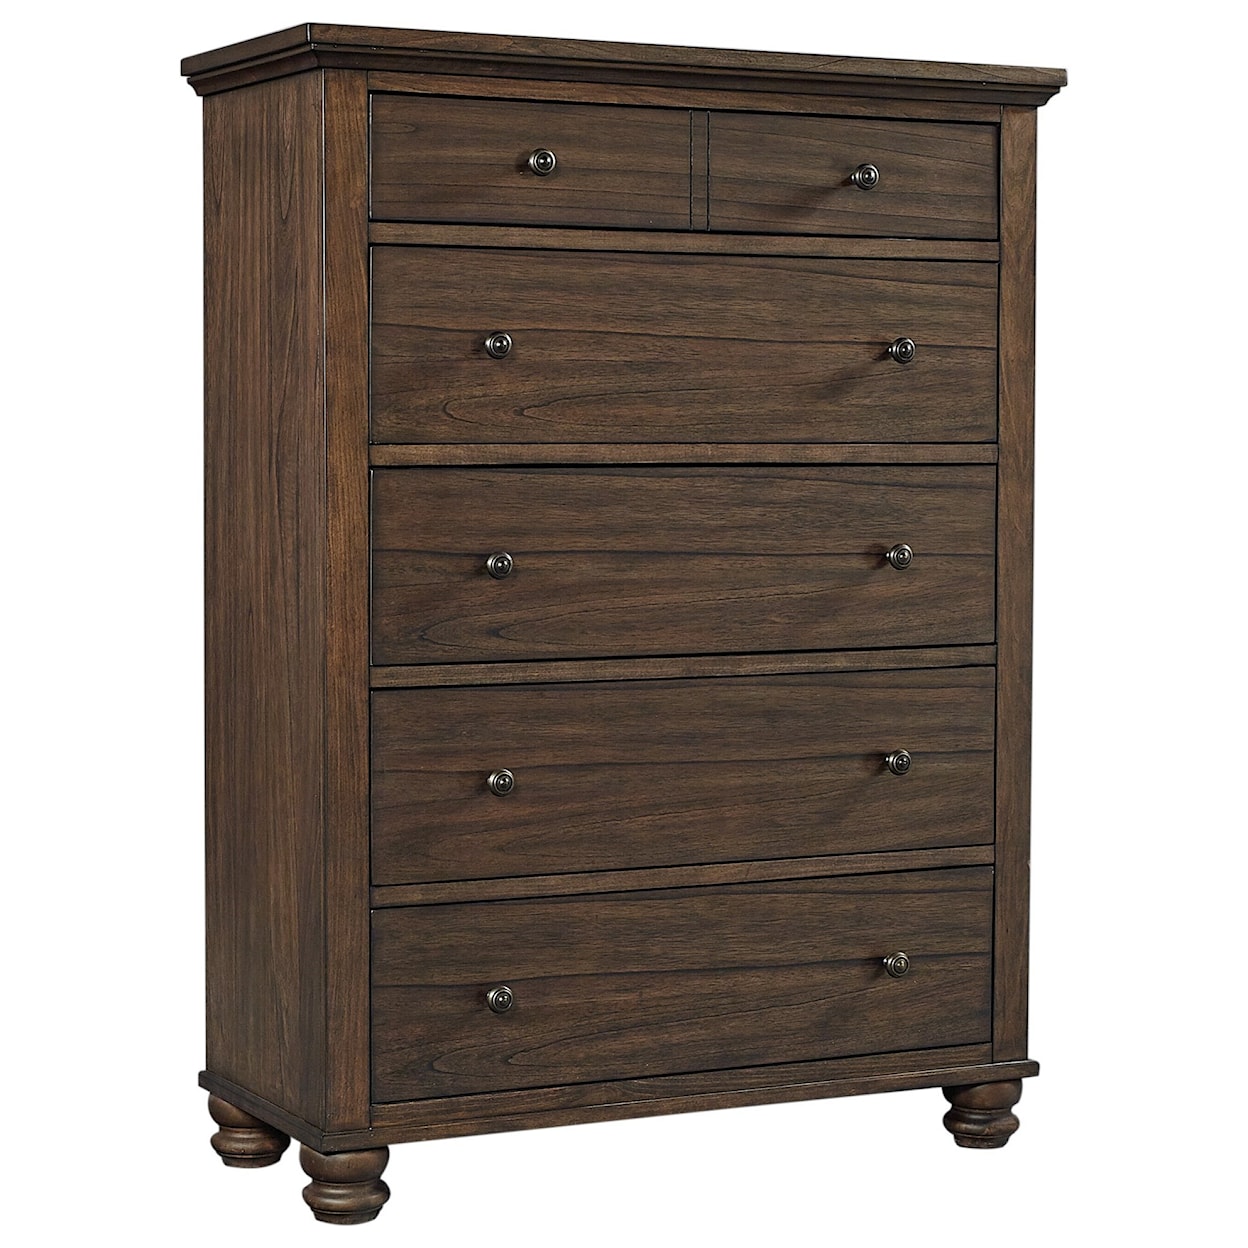 Aspenhome Hudson Valley Chest of Drawers